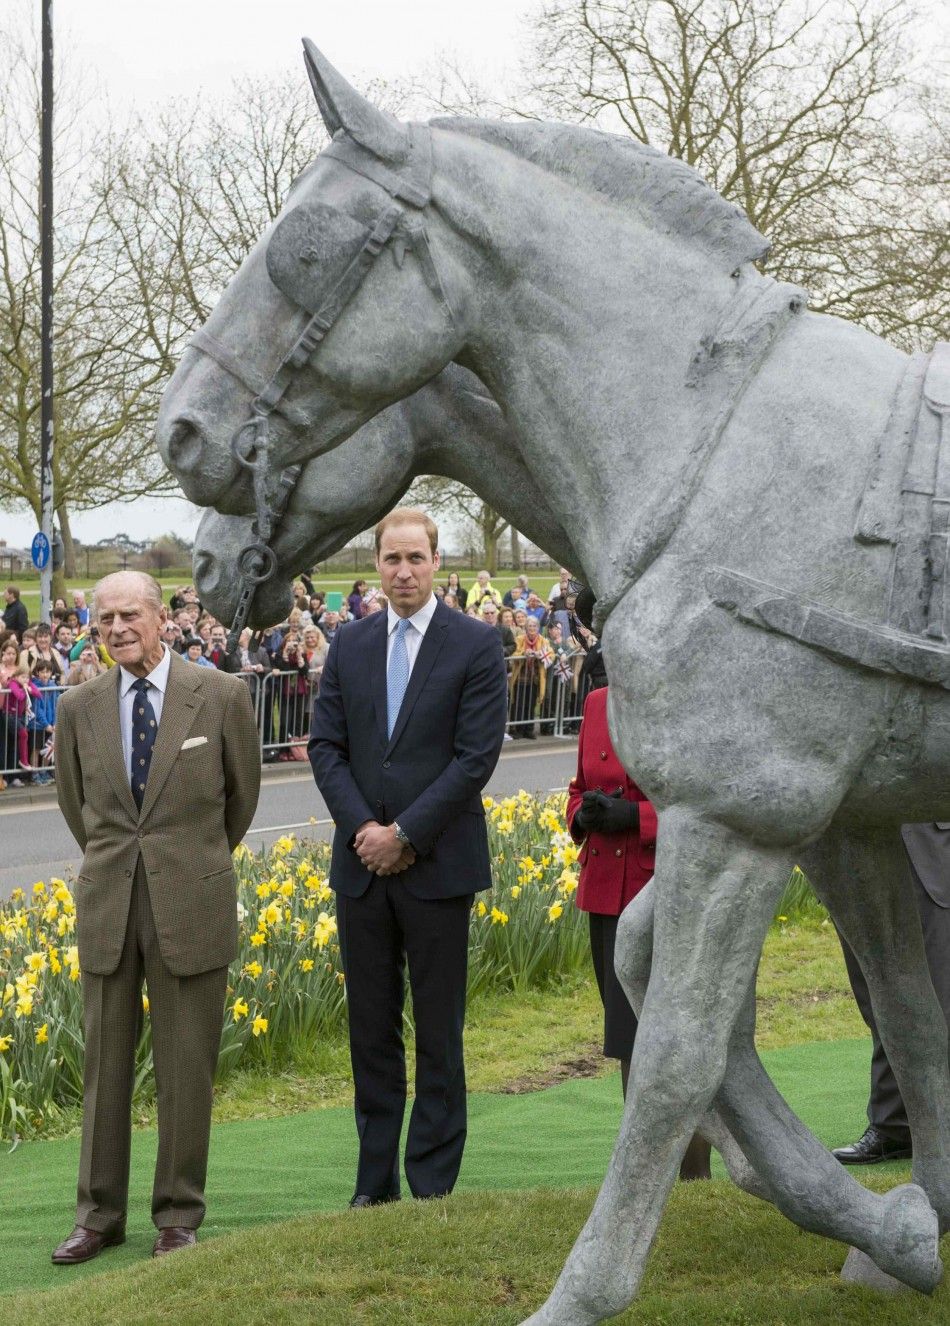 Britains Prince Philip and Prince William look on during unveiling of the Windsor Greys statue in Windsor, southern England